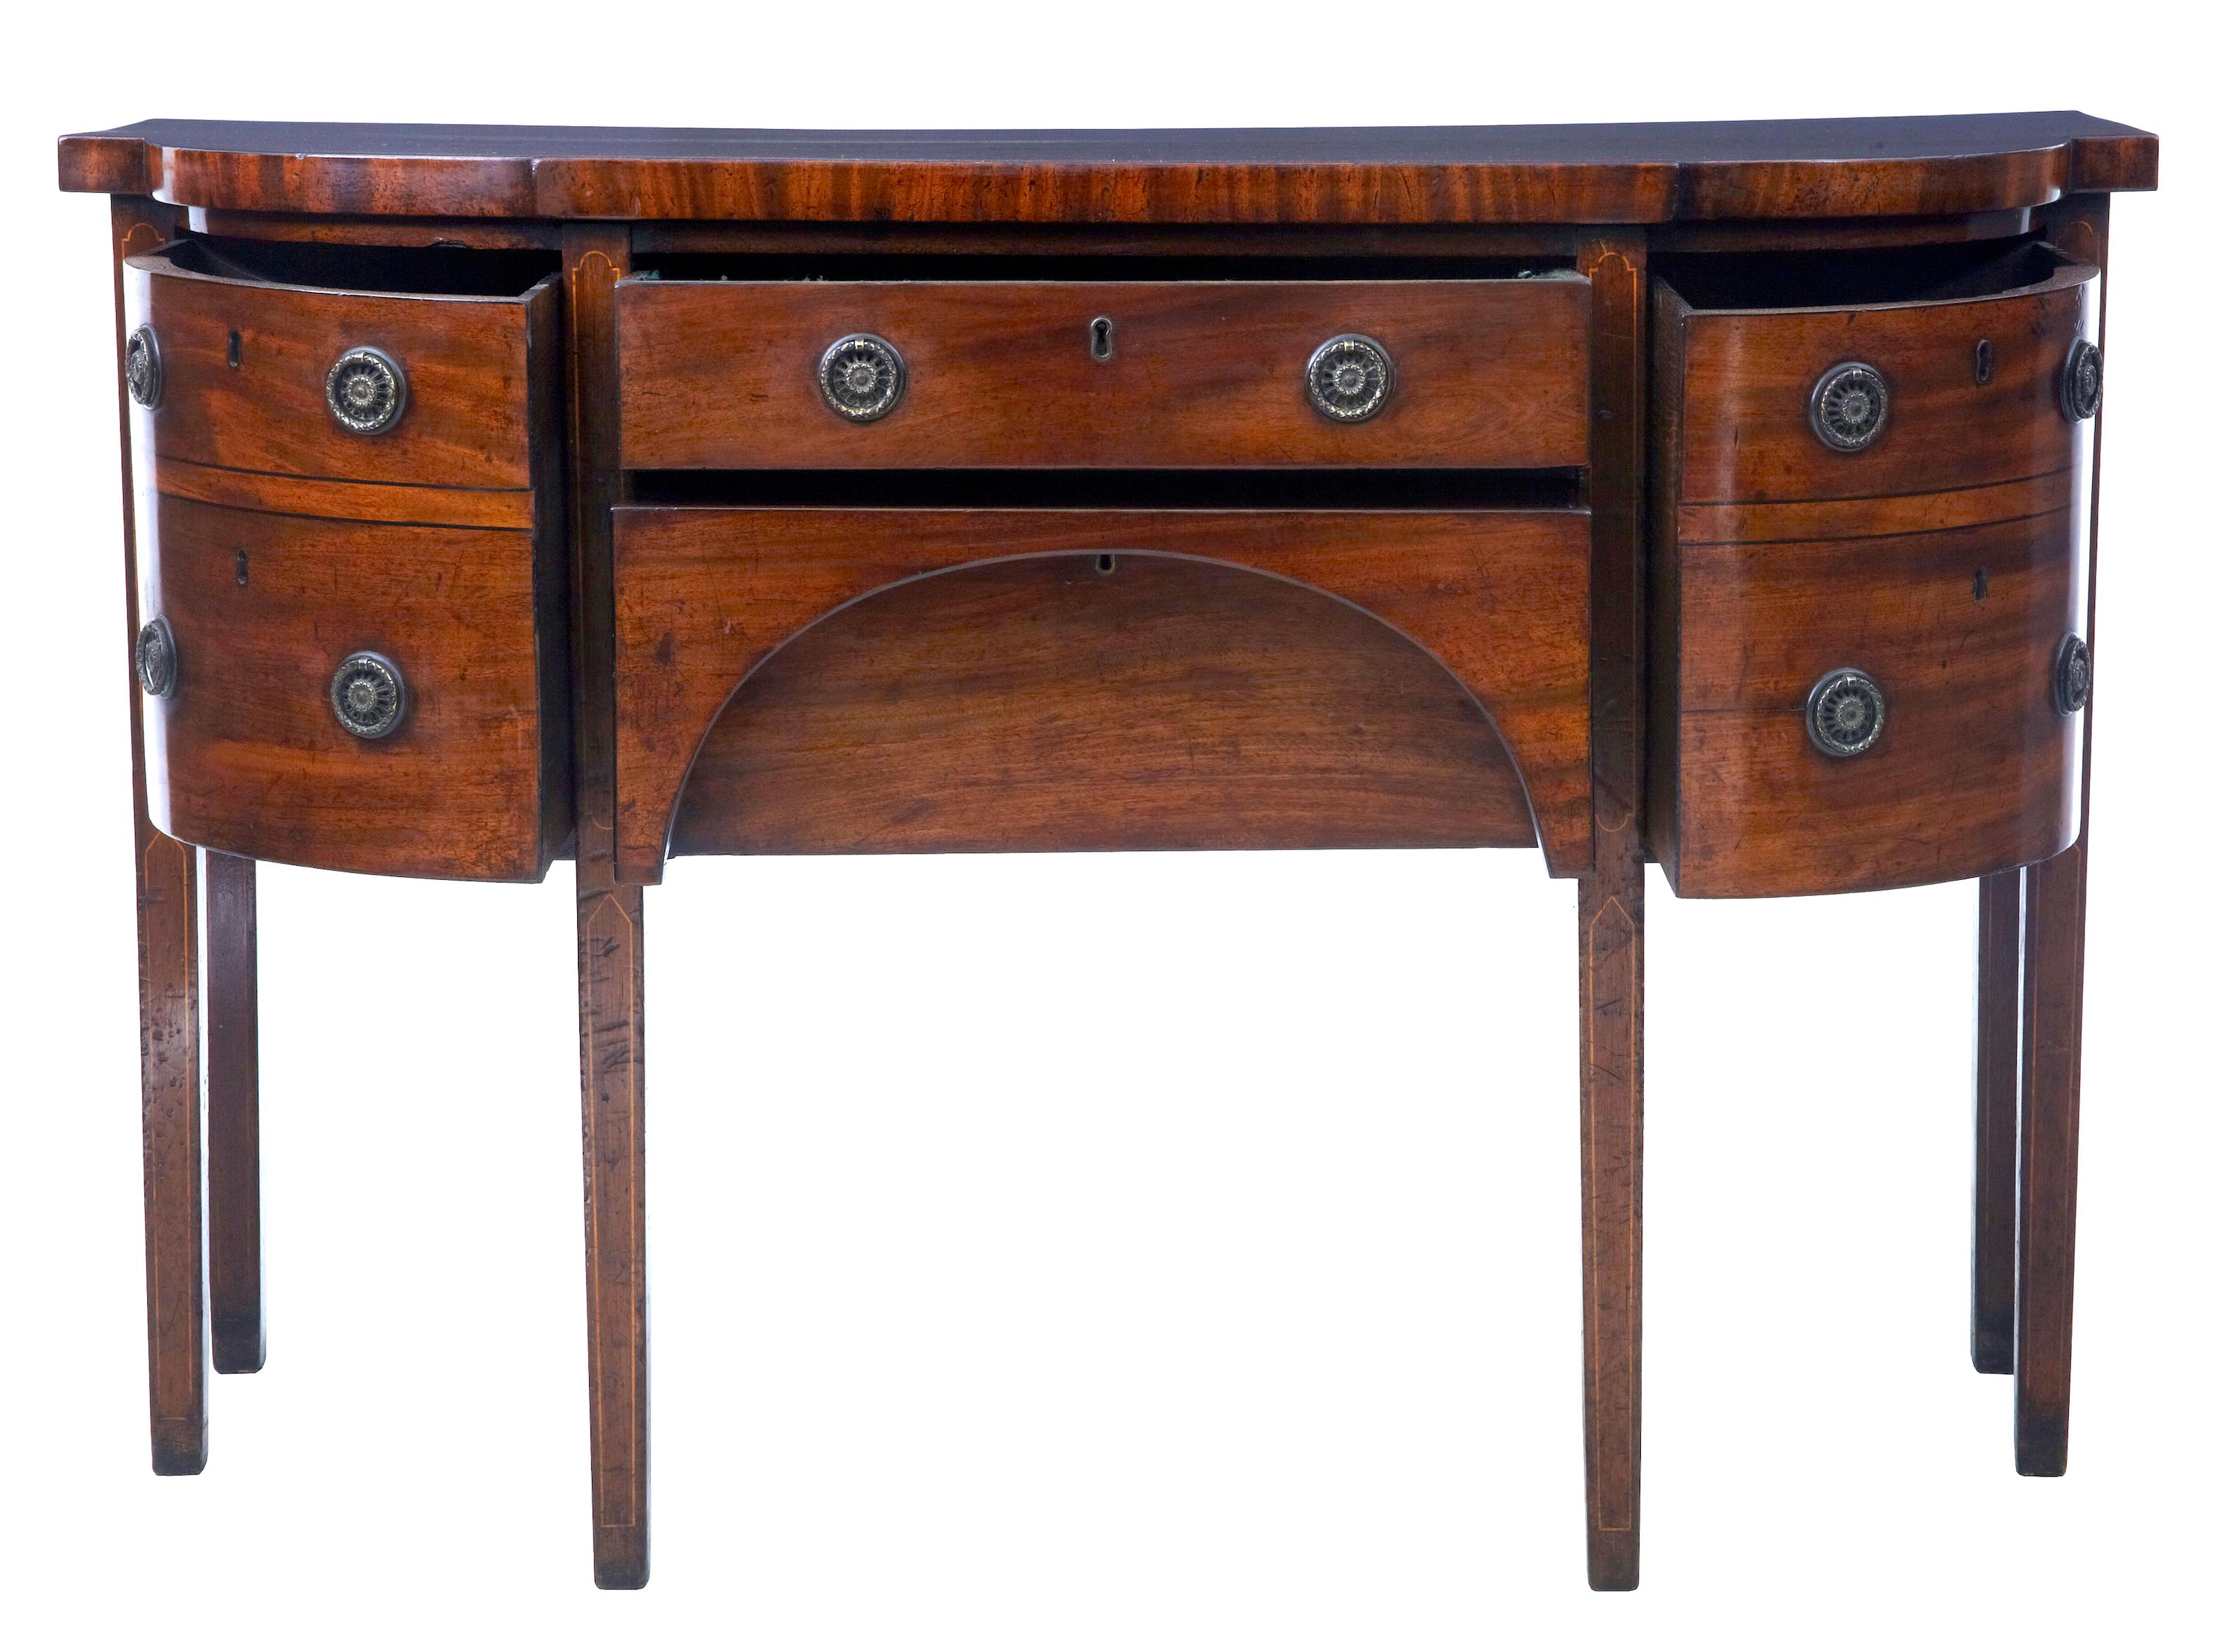 Early 19th century Georgian mahogany breakfront sideboard, circa 1810.

Fine quality late Georgian mahogany sideboard circa 1810. Bowfront and breakfront in shape. 2 drawers to the front and 2 shaped drawers either side. Strung with ebony to the